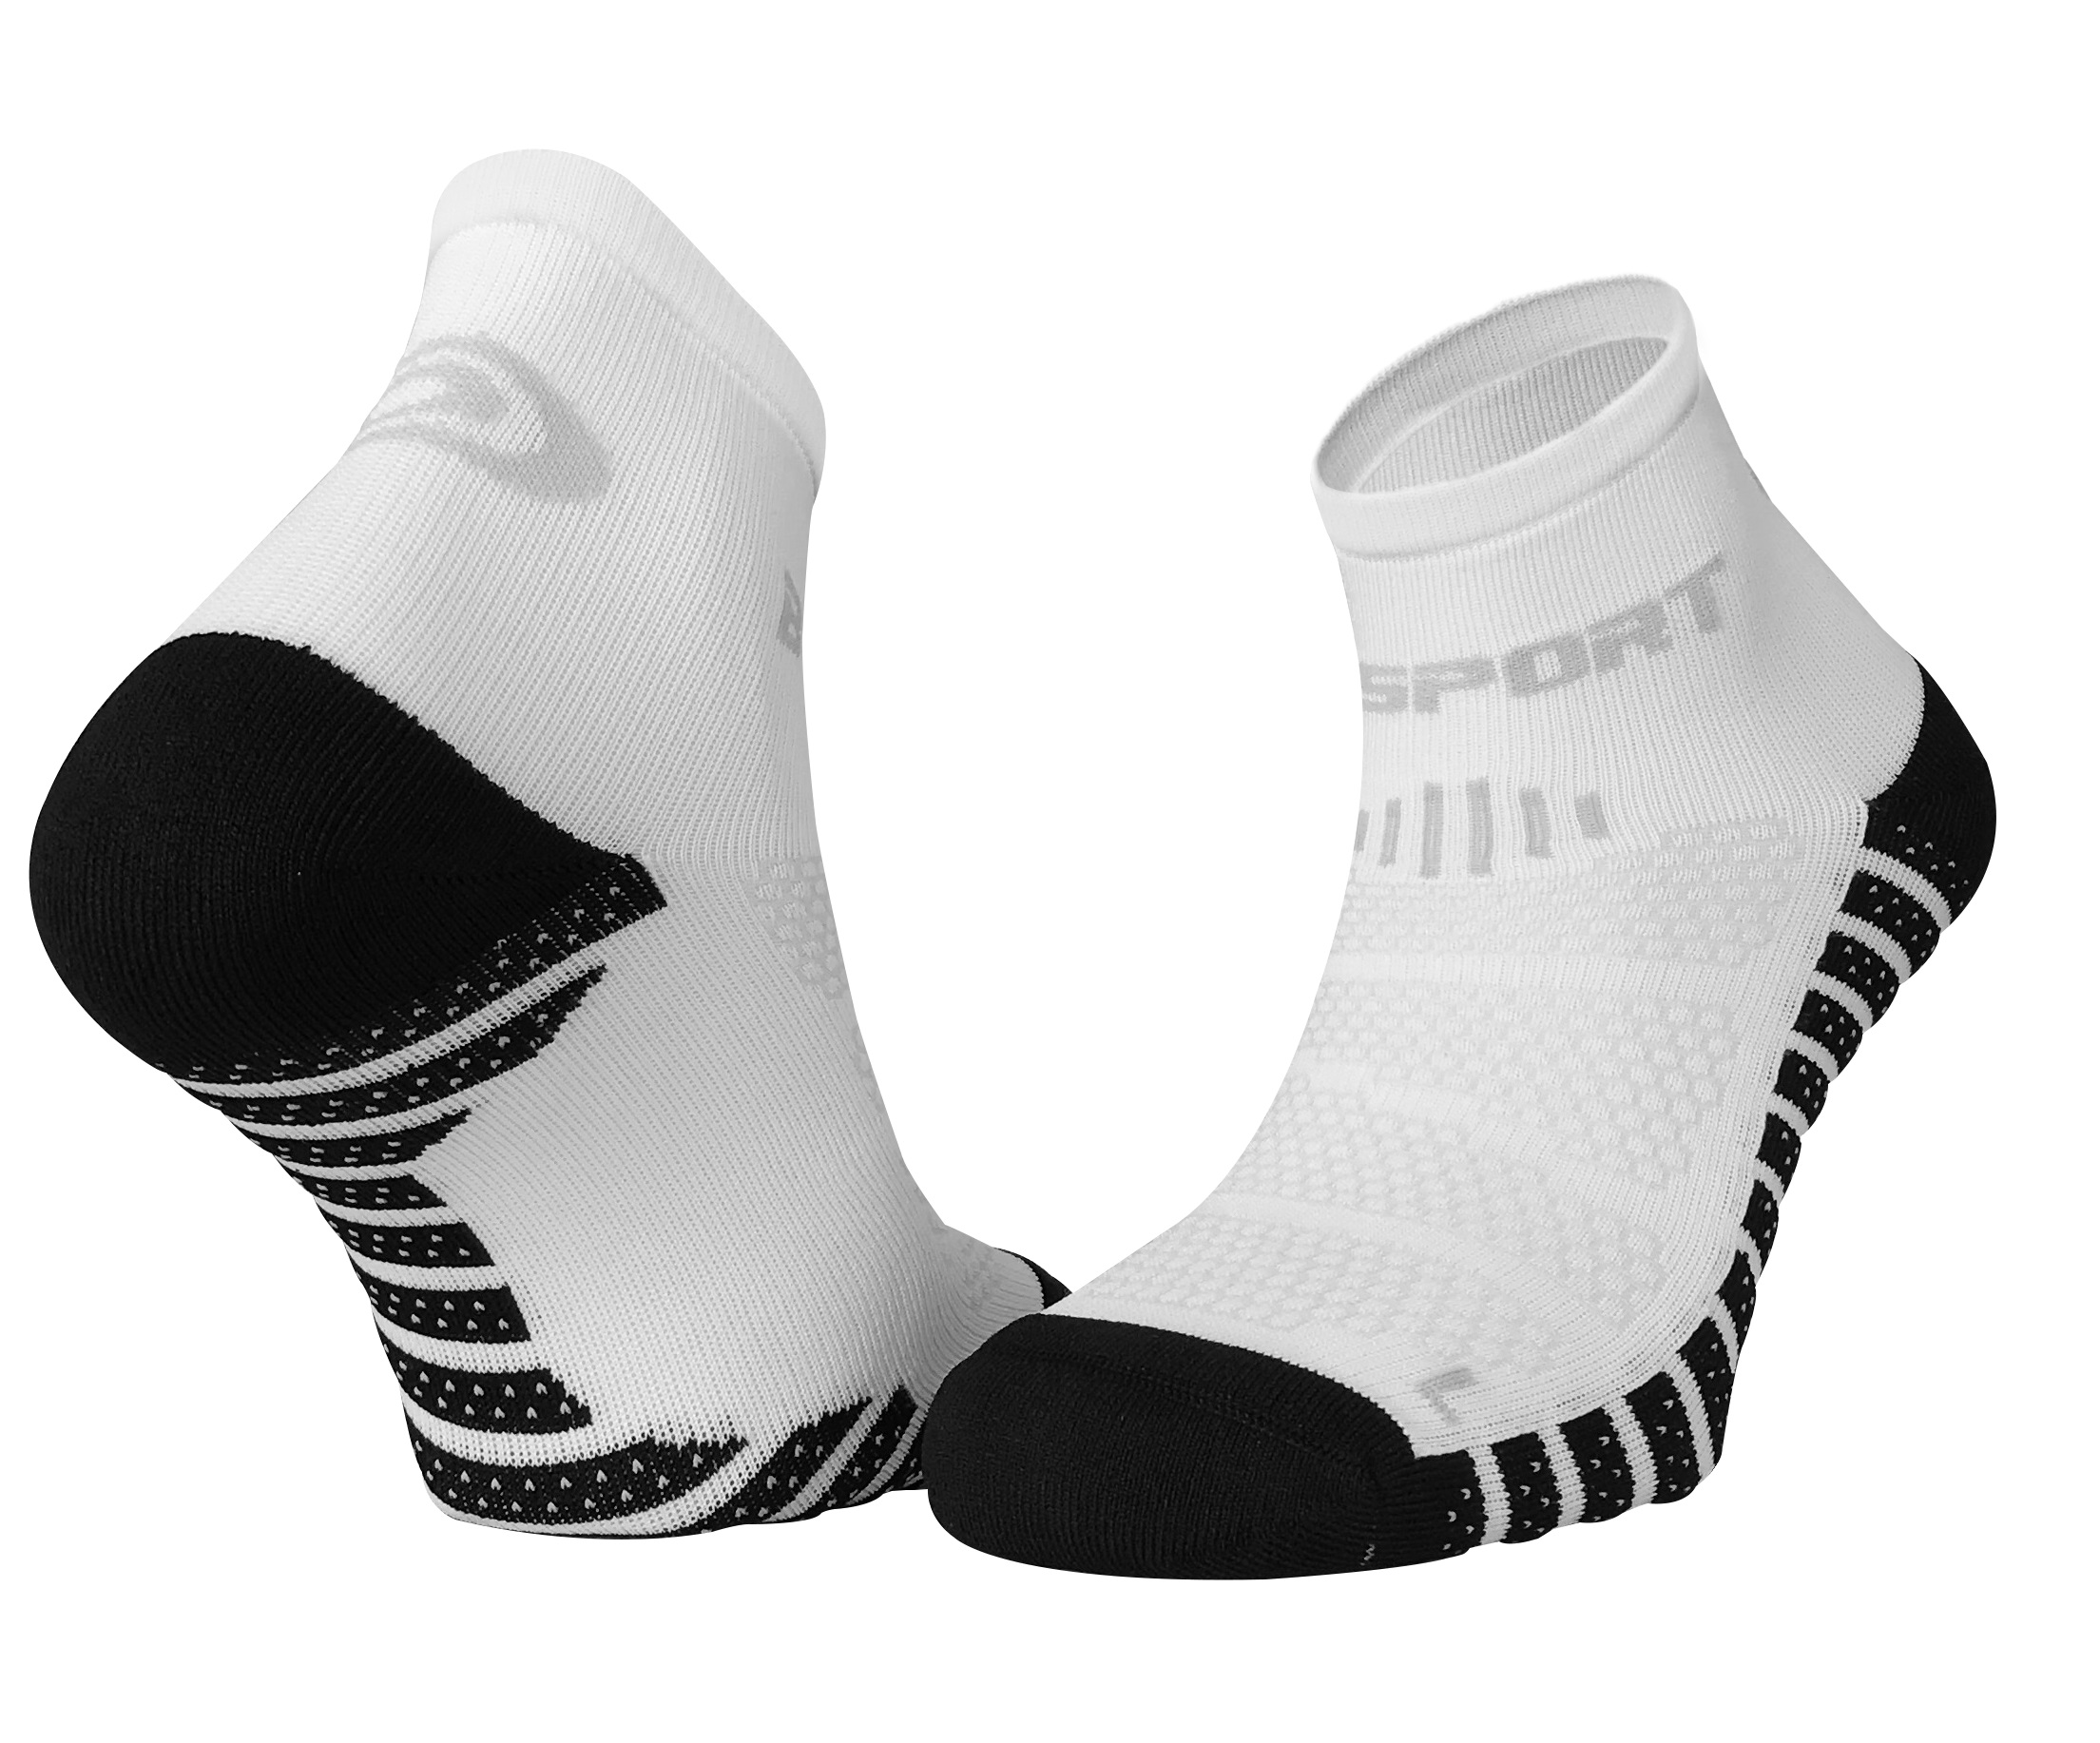 BV SPORT SOCQUETTES SCR ONE EVO BLANCHES  Chaussettes Running BV Sport